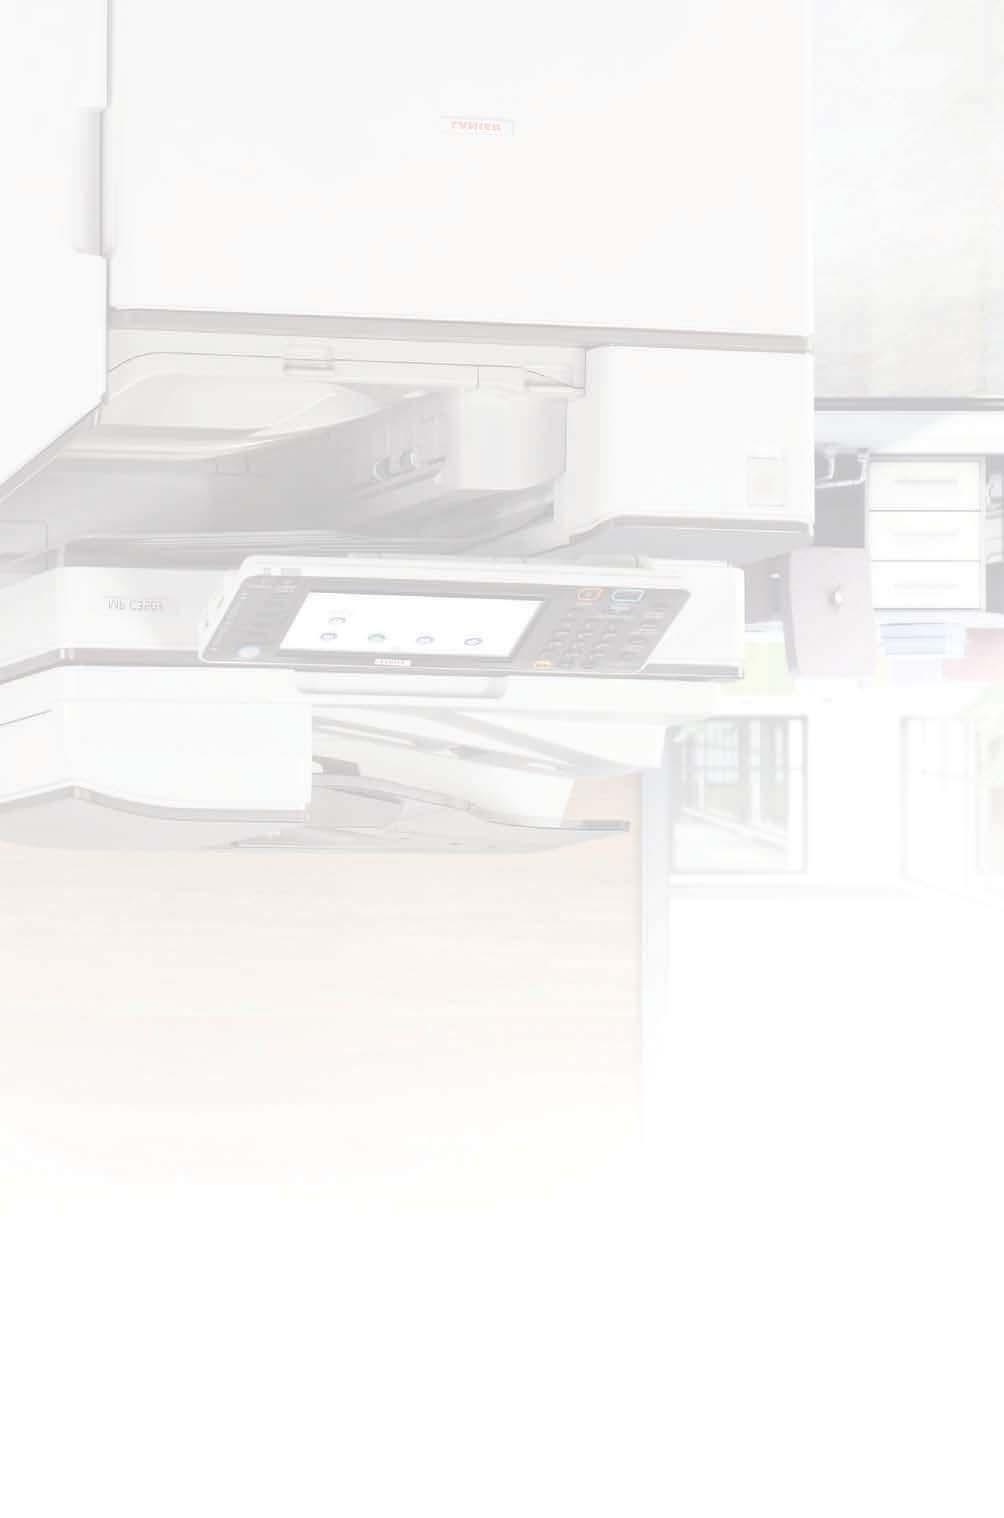 streamline workflow to improve productivity Advanced capabilities for convenient control Fast, reliable production This powerful and innovative MFP series delivers highquality, monochrome or colour